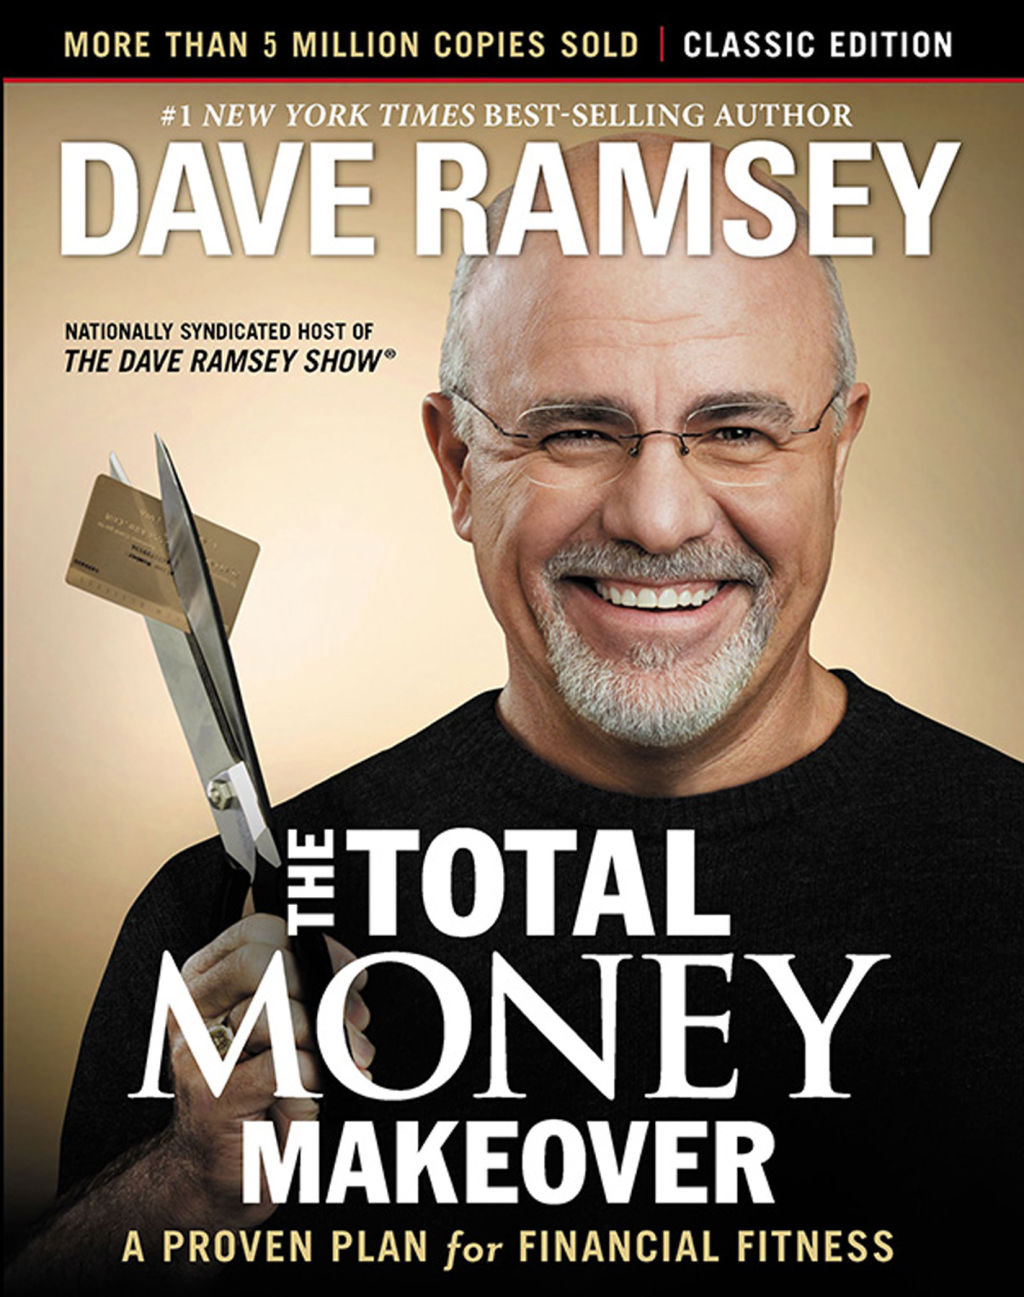 The Total Money Makeover by Dave Ramsey was a sensational and Australians are turning to his mortgage calculator more than the local big four banks.